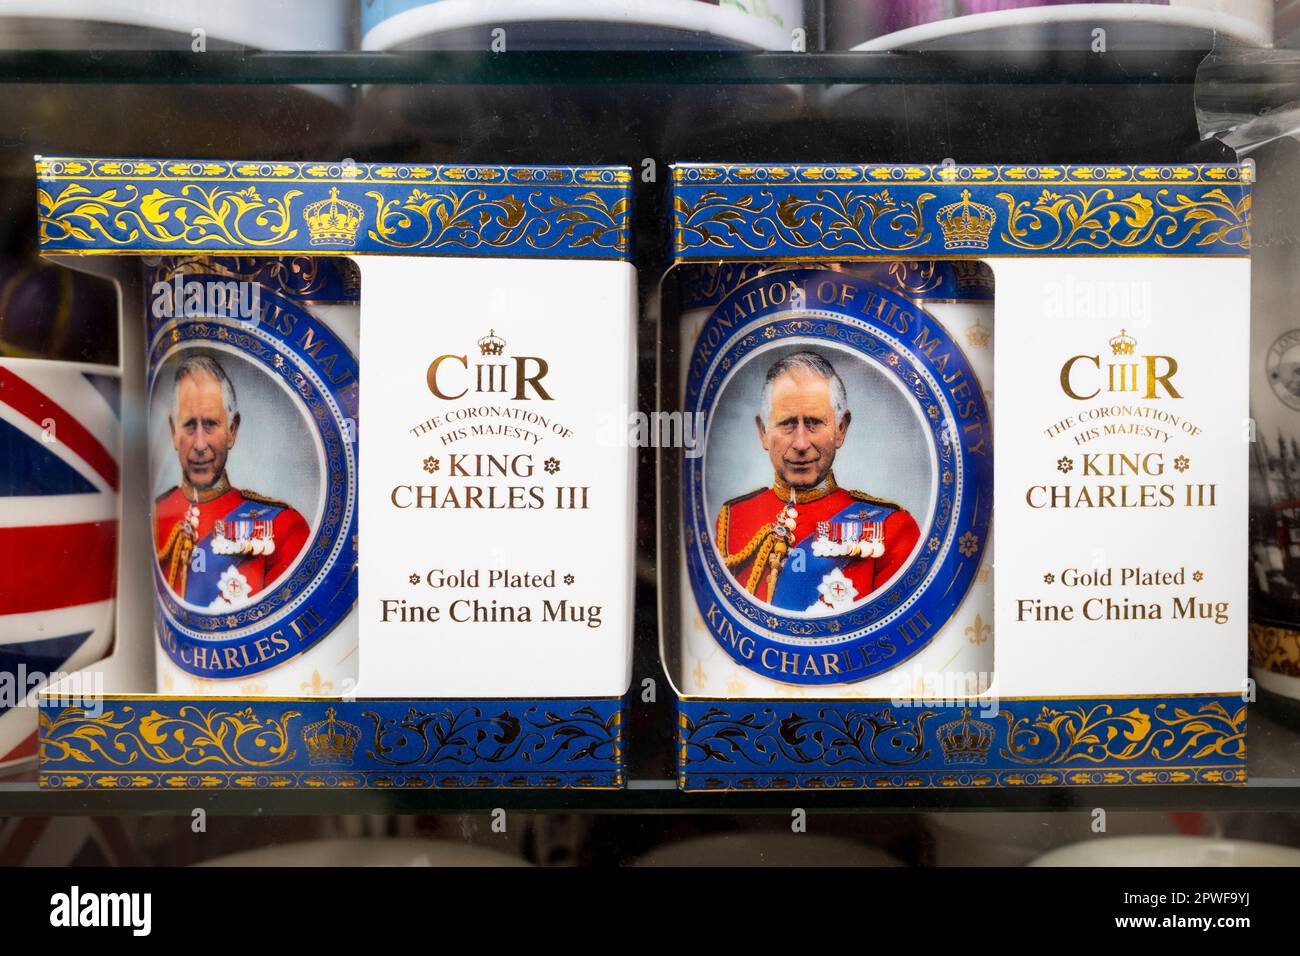 London, UK.  30 April 2023.  Royal memorabilia, including souvenir King Charles mugs bearing the new King's cipher, seen in the window of a souvenir shop in Paddington ahead of the coronation of King Charles III on 6 May.  Credit: Stephen Chung / Alamy Live News Stock Photo